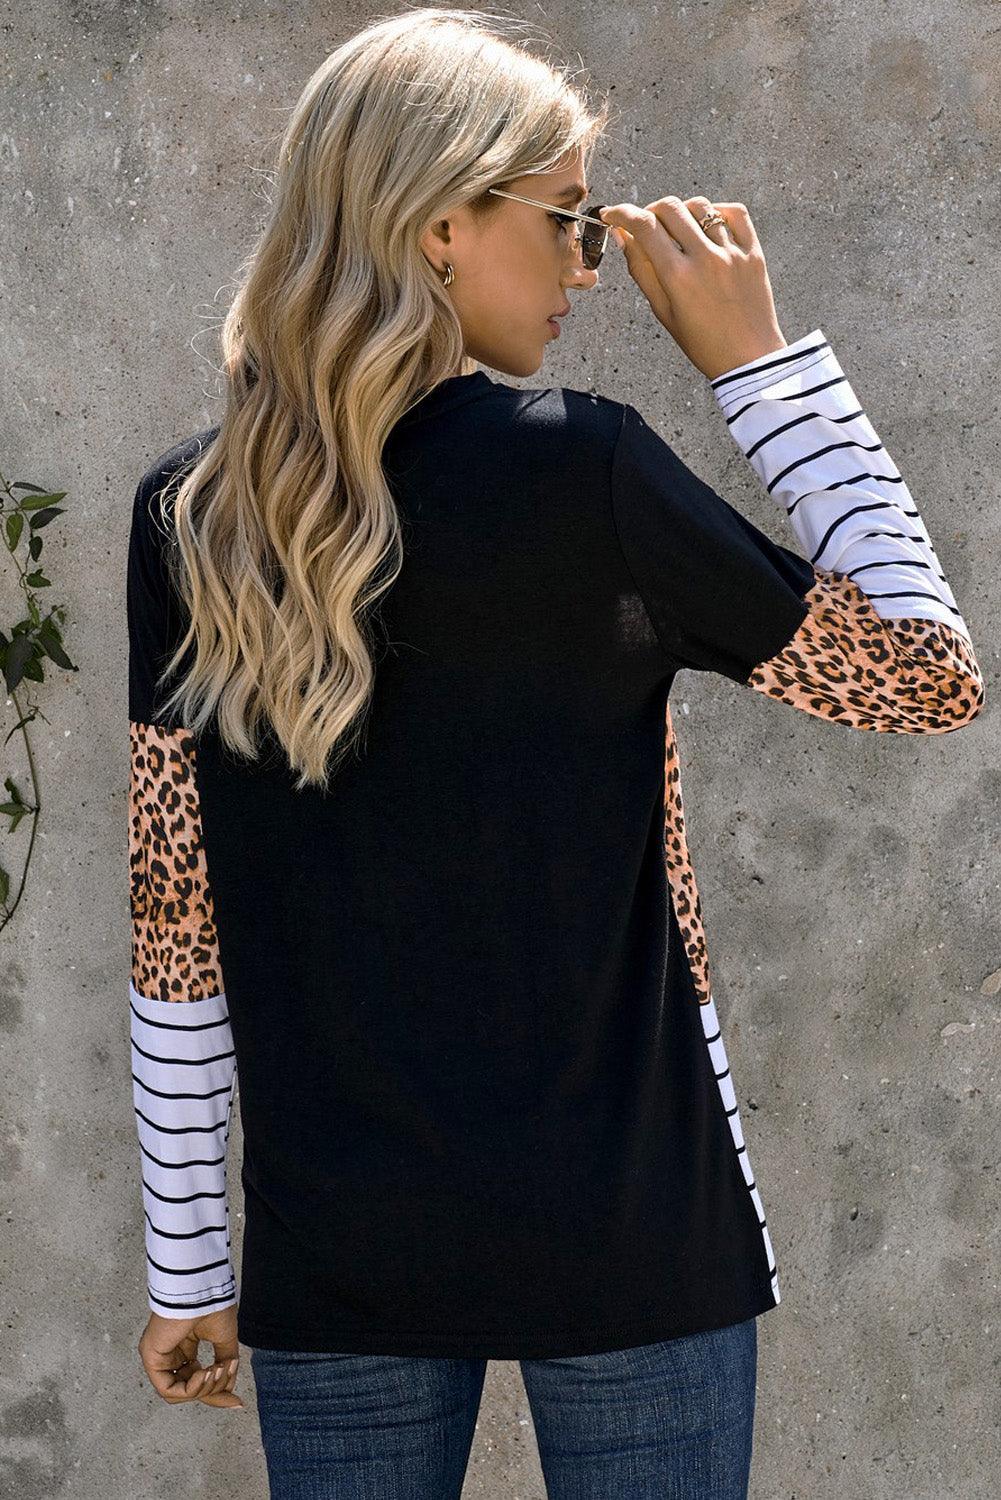 Leopard Striped Patchwork Long Sleeve Top with Pocket - L & M Kee, LLC